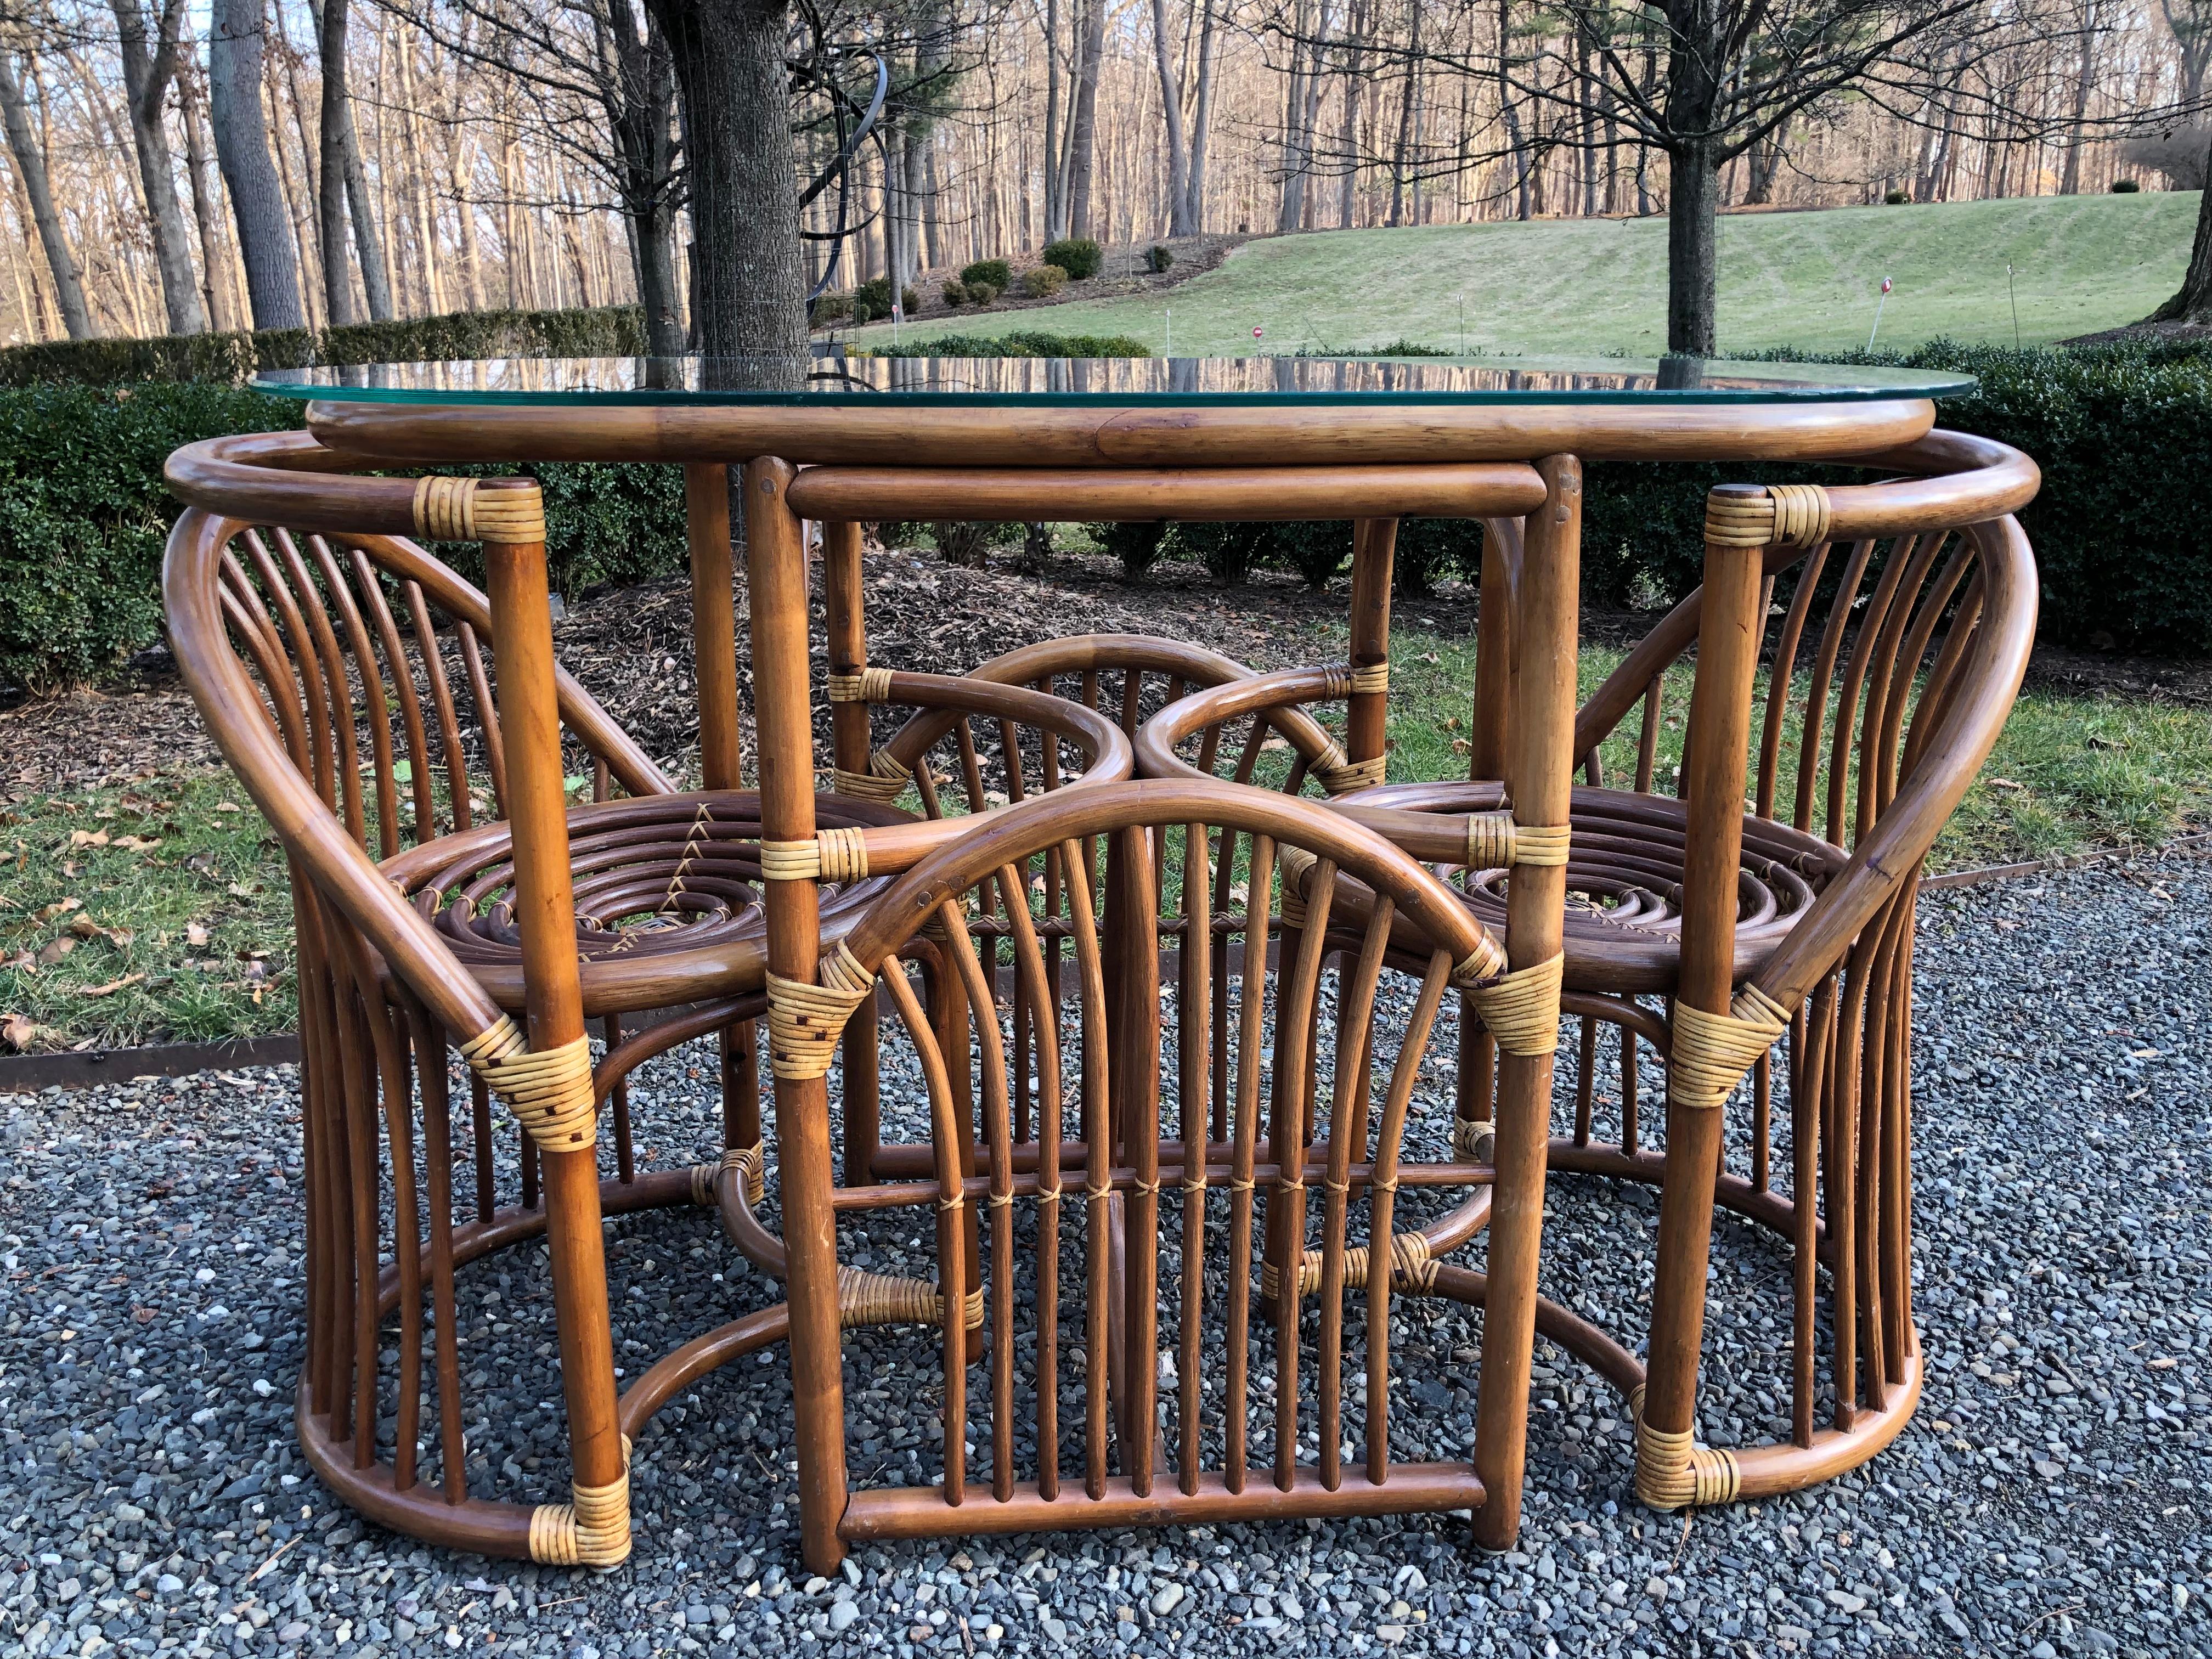 Midcentury bentwood and rattan dining set for two with glass top. Matching chairs have seats with concentric circles. The bentwood is a great shade of caramel and has nice patina. The table has an oval glass top and measures 44” wide x 22” deep x